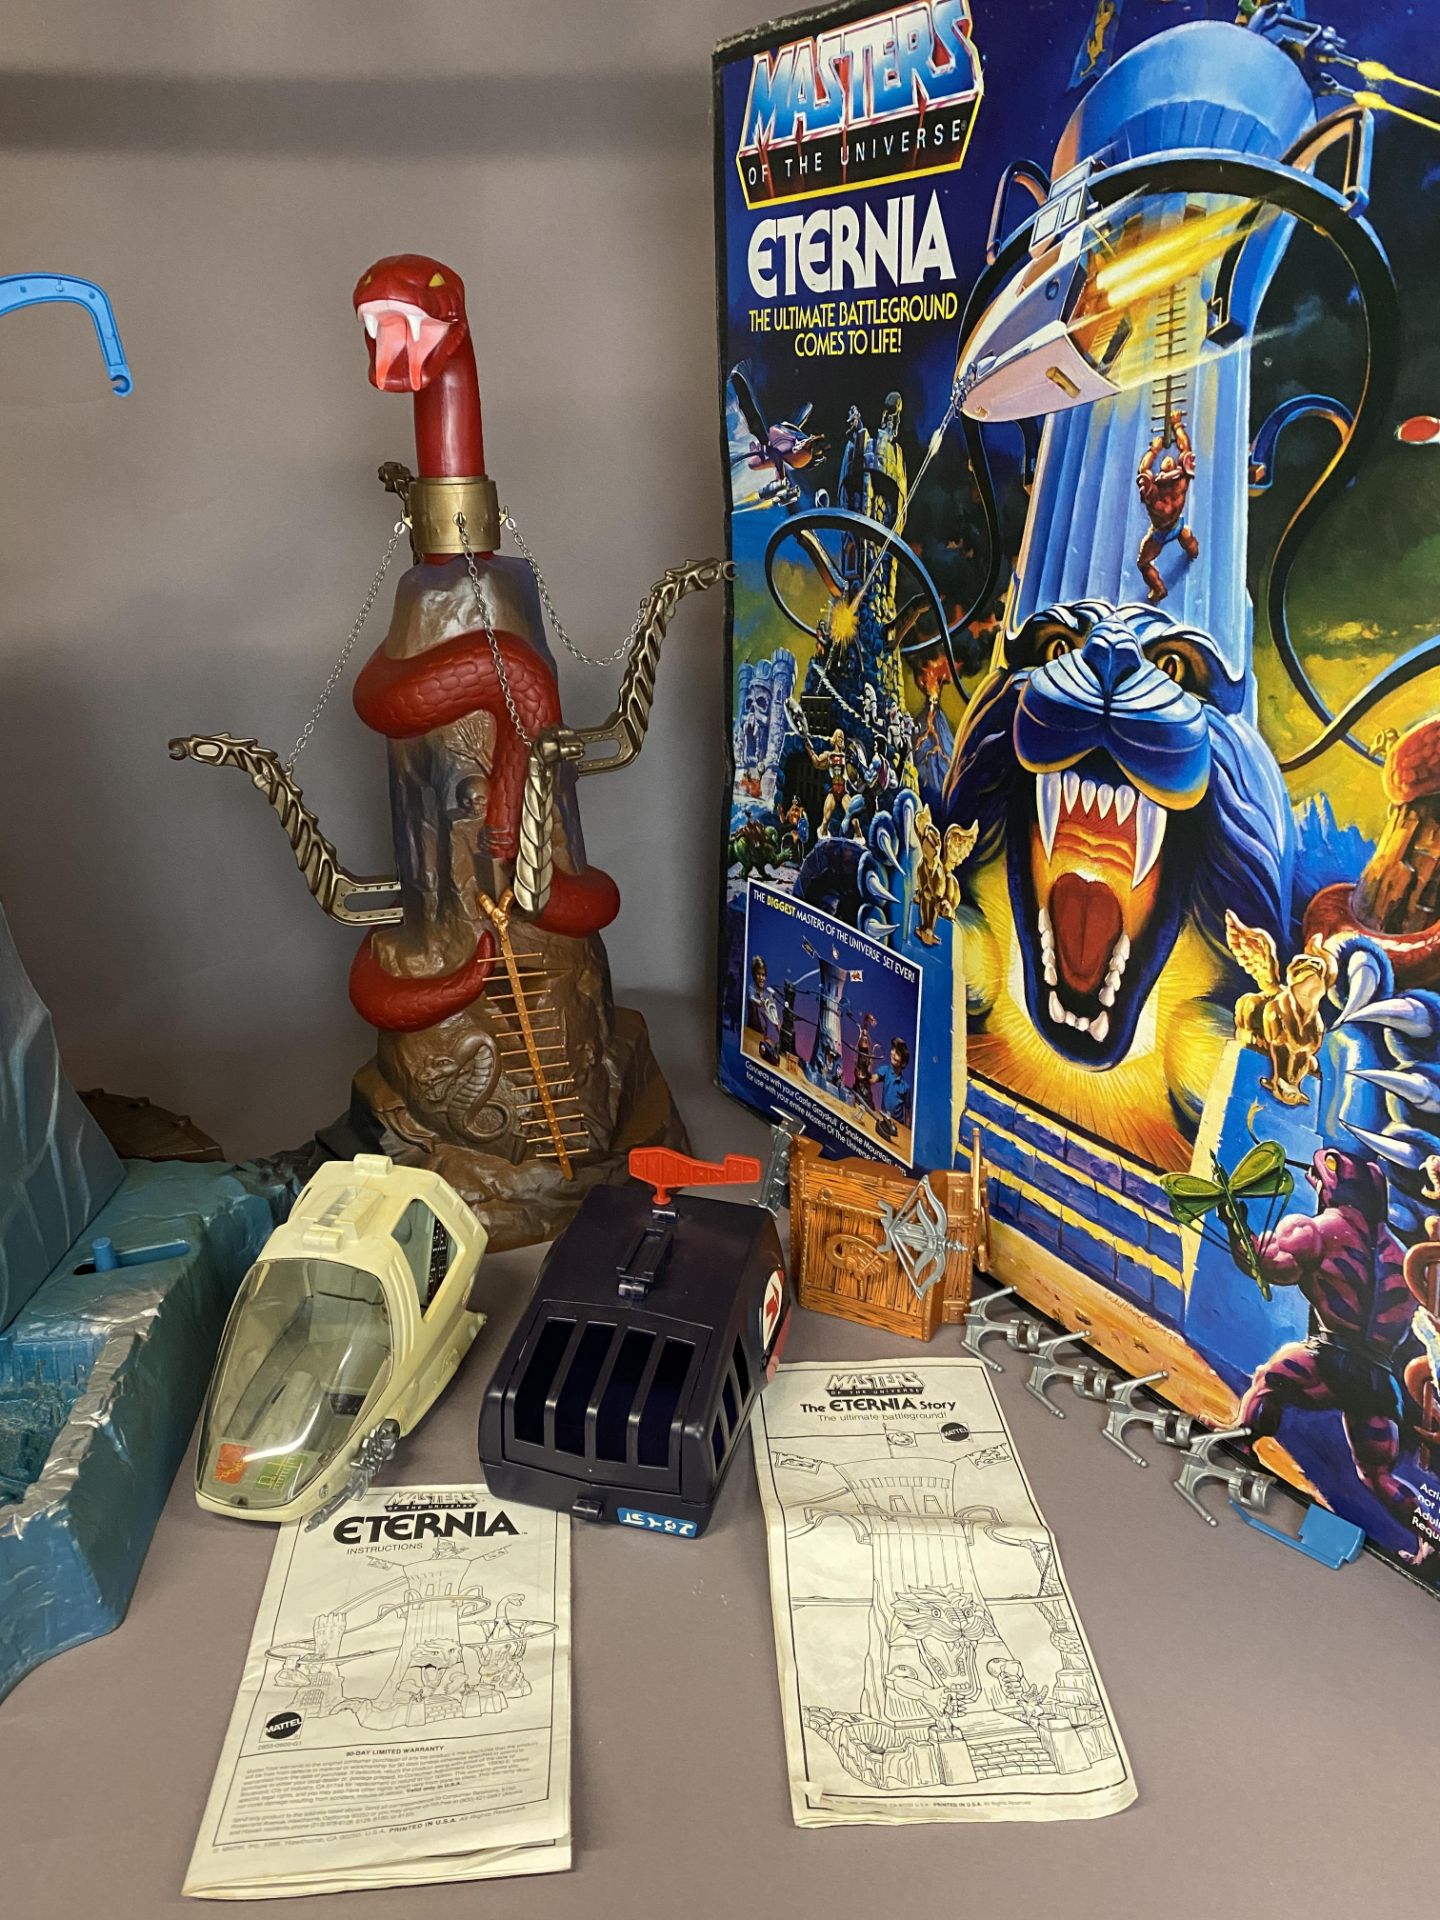 ETERNIA - Vintage Masters of the Universe Playset and Original Box (MOTU) - Appears to be complete - Image 87 of 125